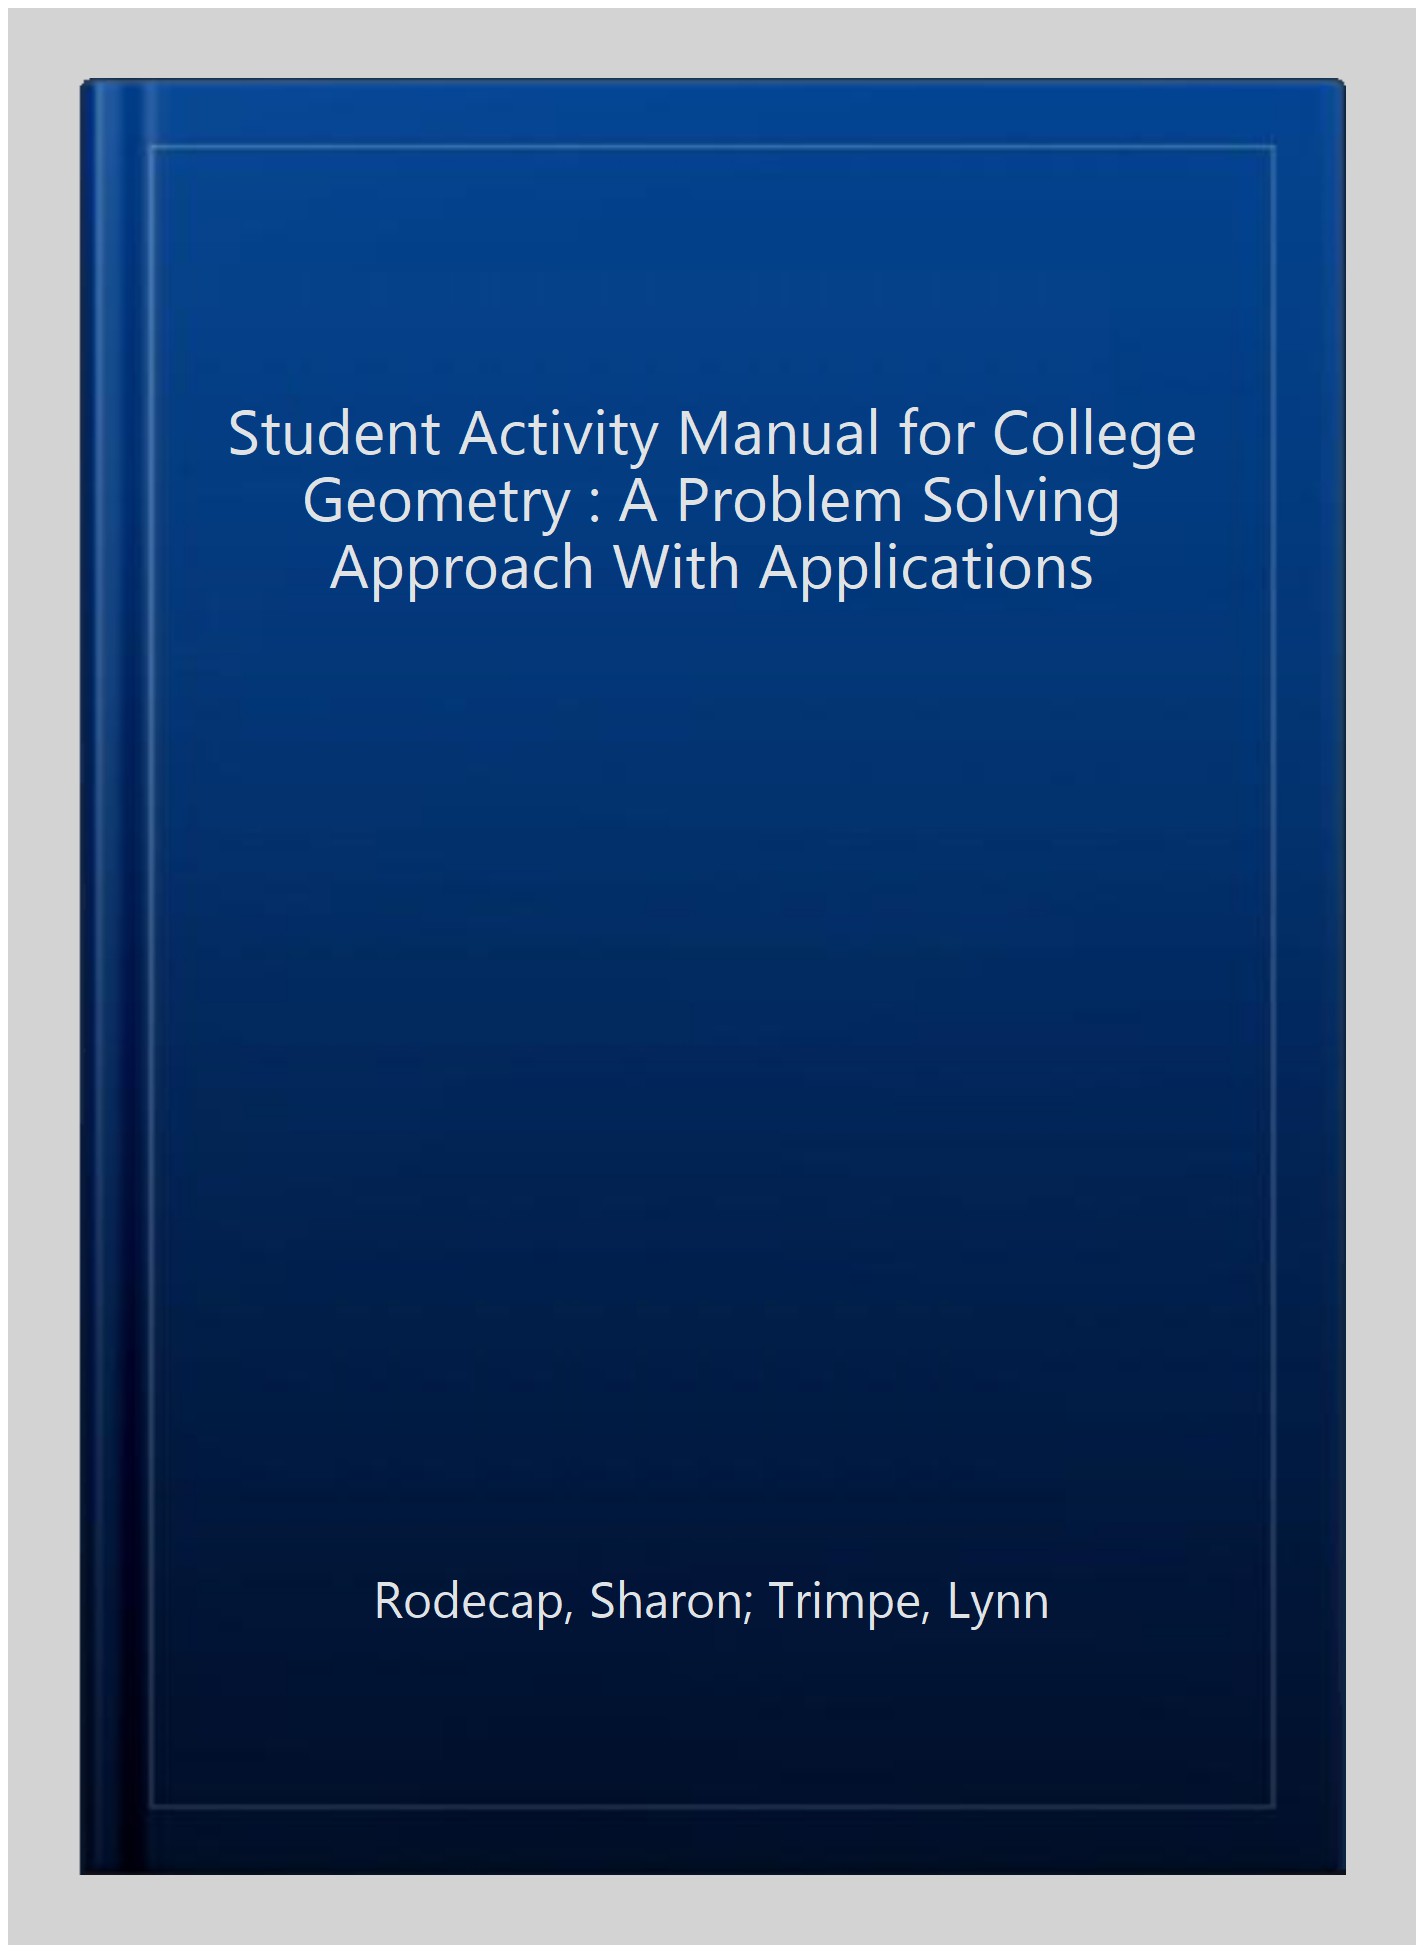 Student Activity Manual for College Geometry : A Problem Solving Approach With Applications - Rodecap, Sharon; Trimpe, Lynn; Riverstone, Lyn